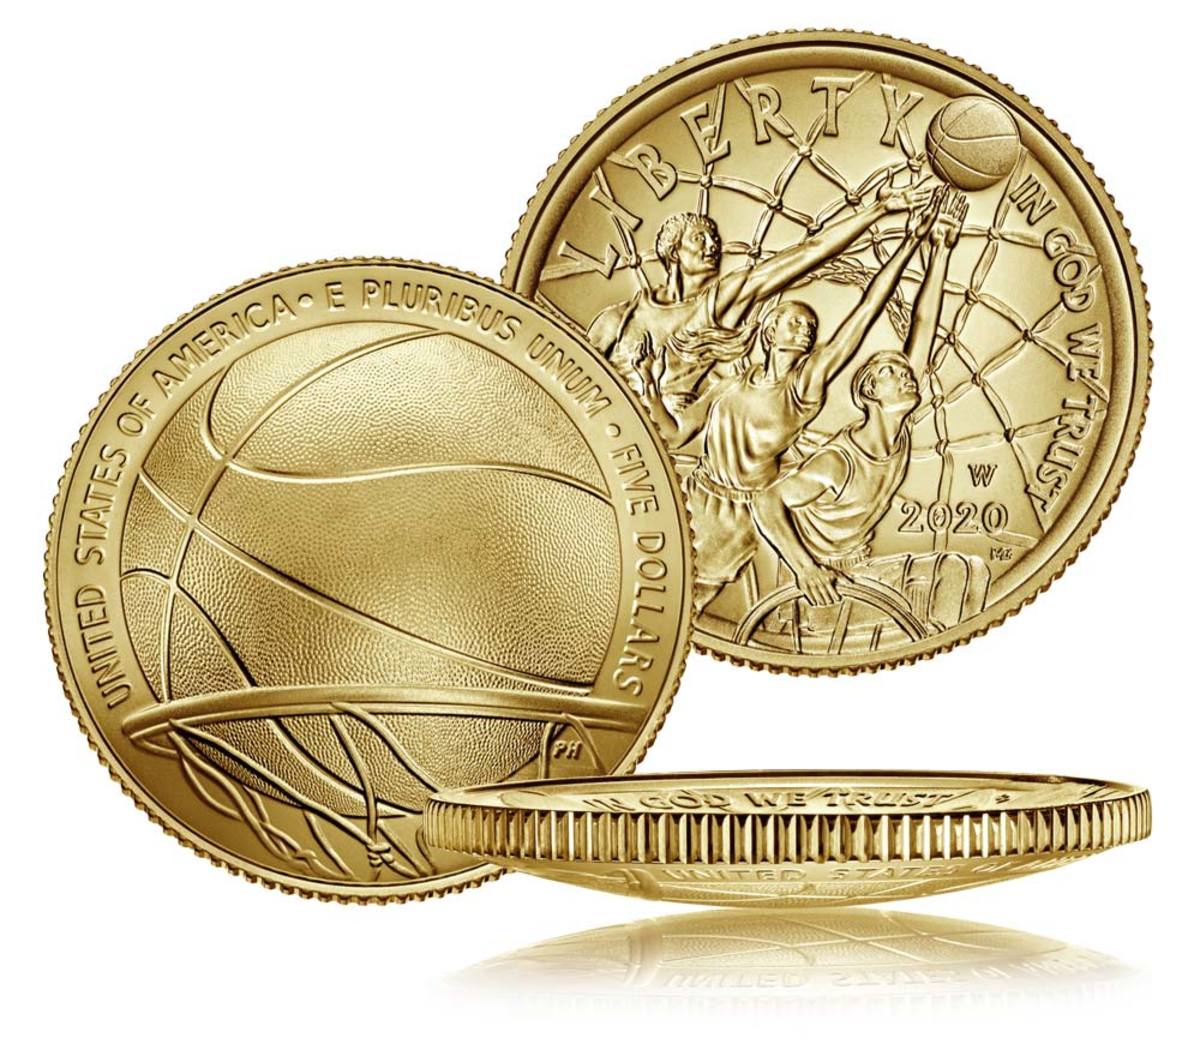 The Basketball Hall of Fame commemoratives will finally be released June 4 with seven new issues, including this uncirculated $5 gold piece.